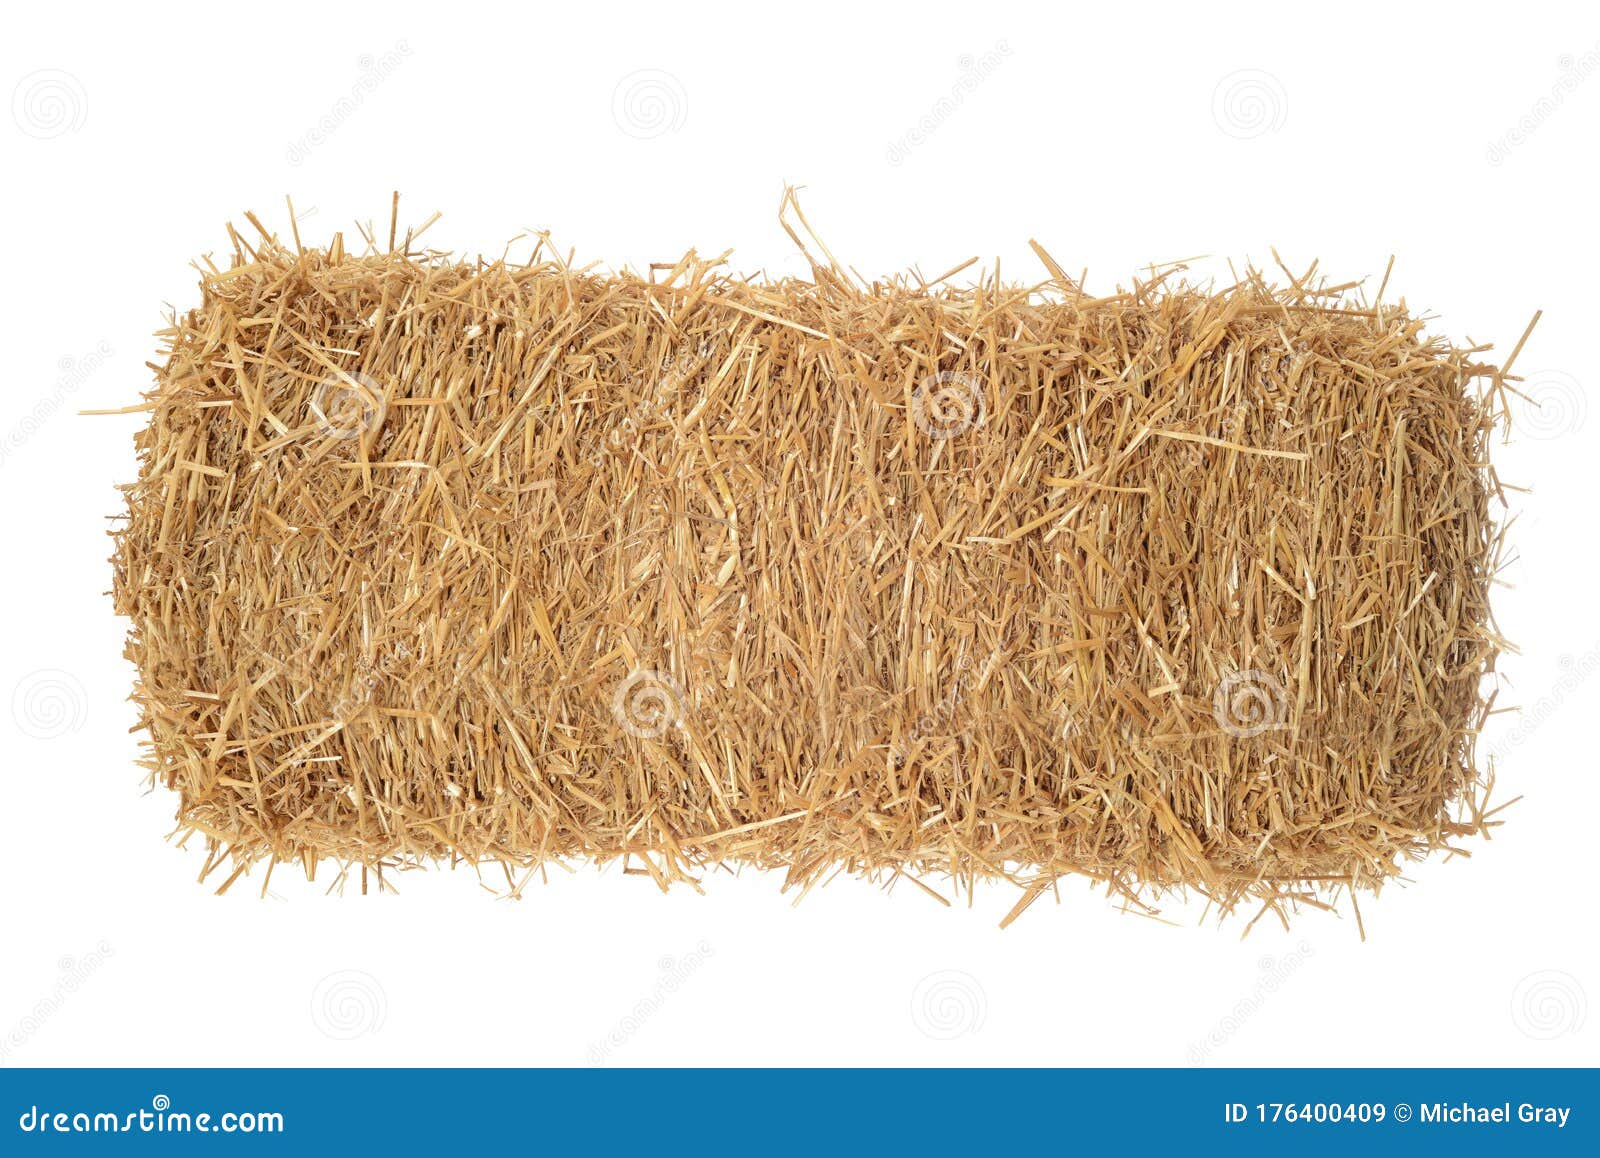  bale of hay on white